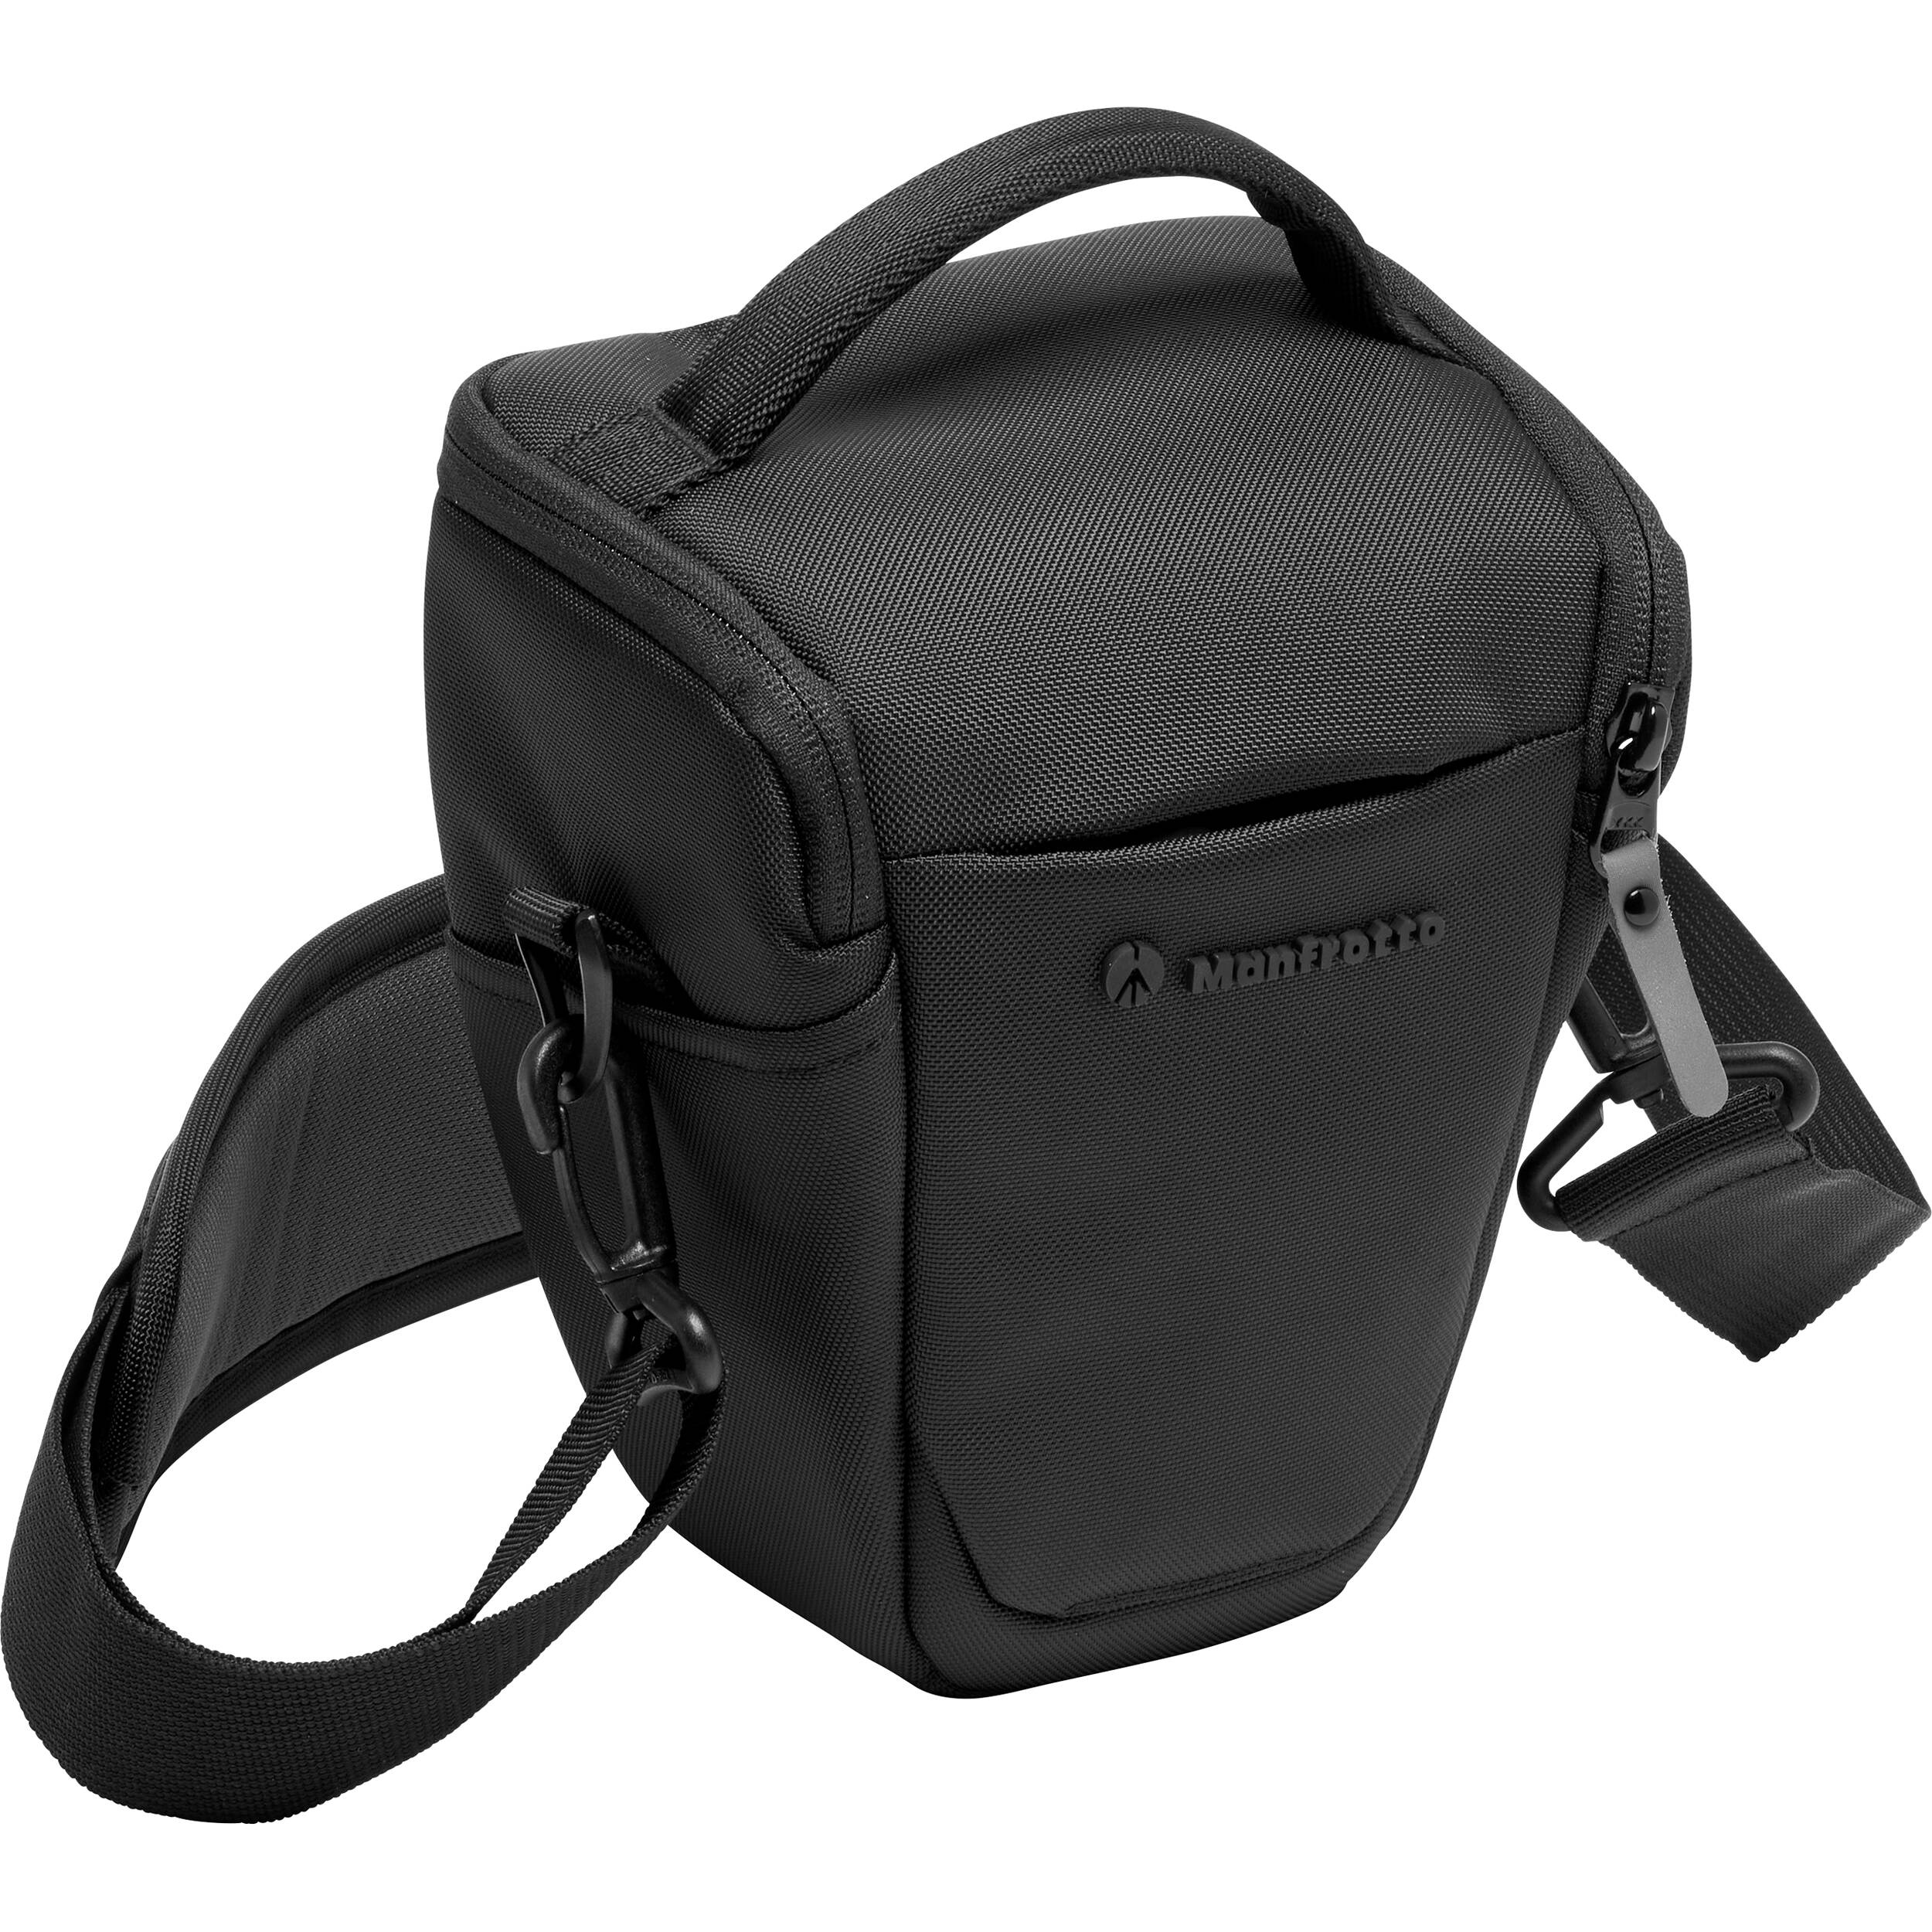 Bag Manfrotto. Holster avancé S III